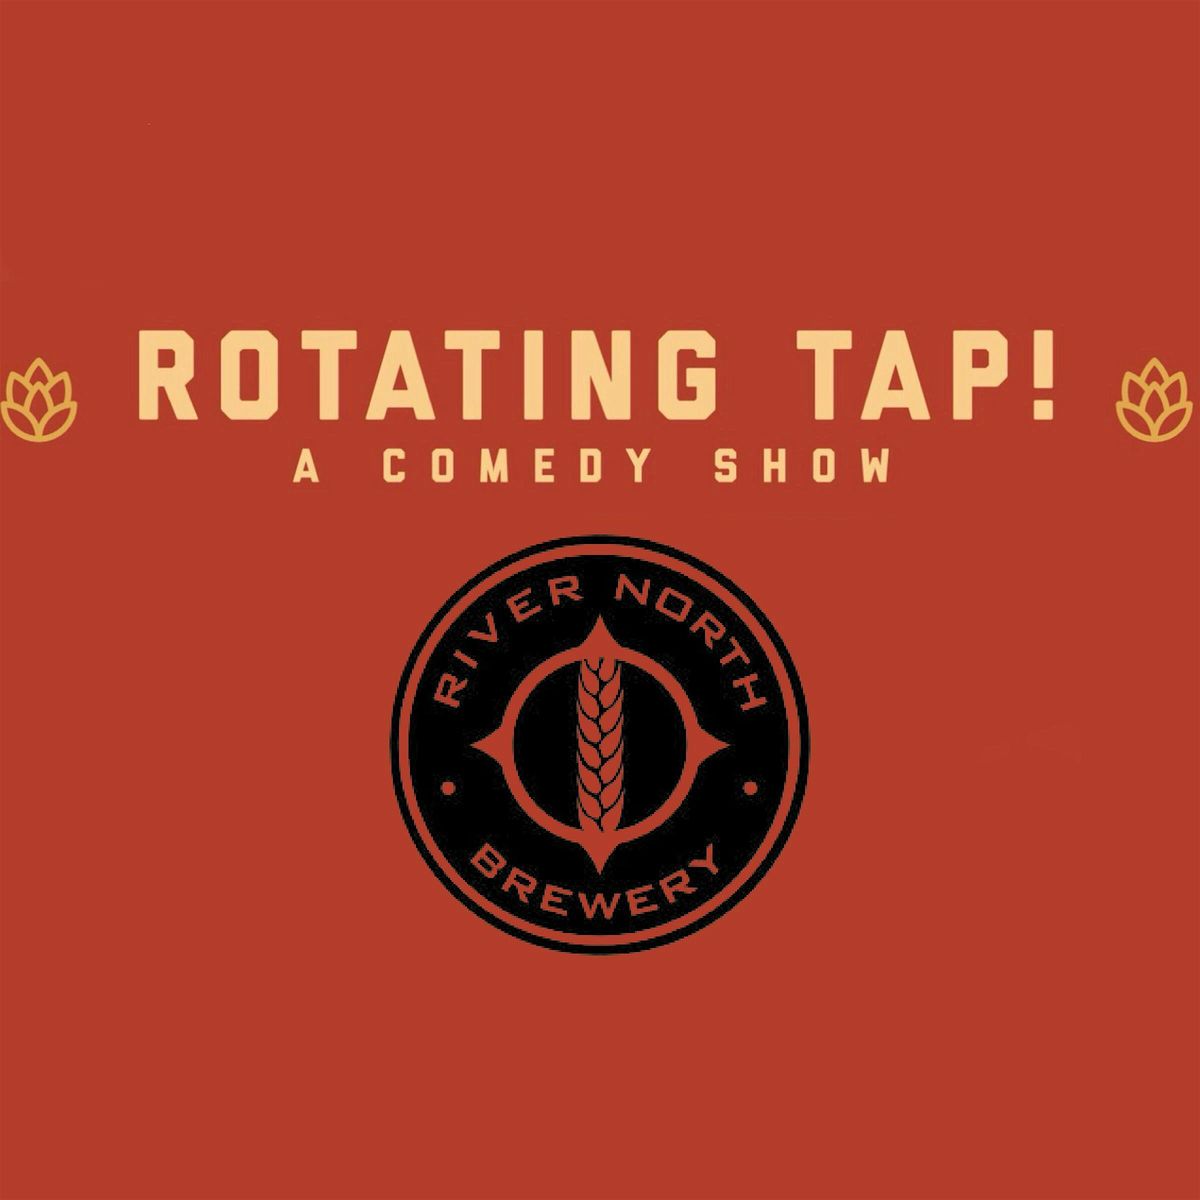 Rotating Tap Comedy @ River North Brewery (Blake St. Taproom)